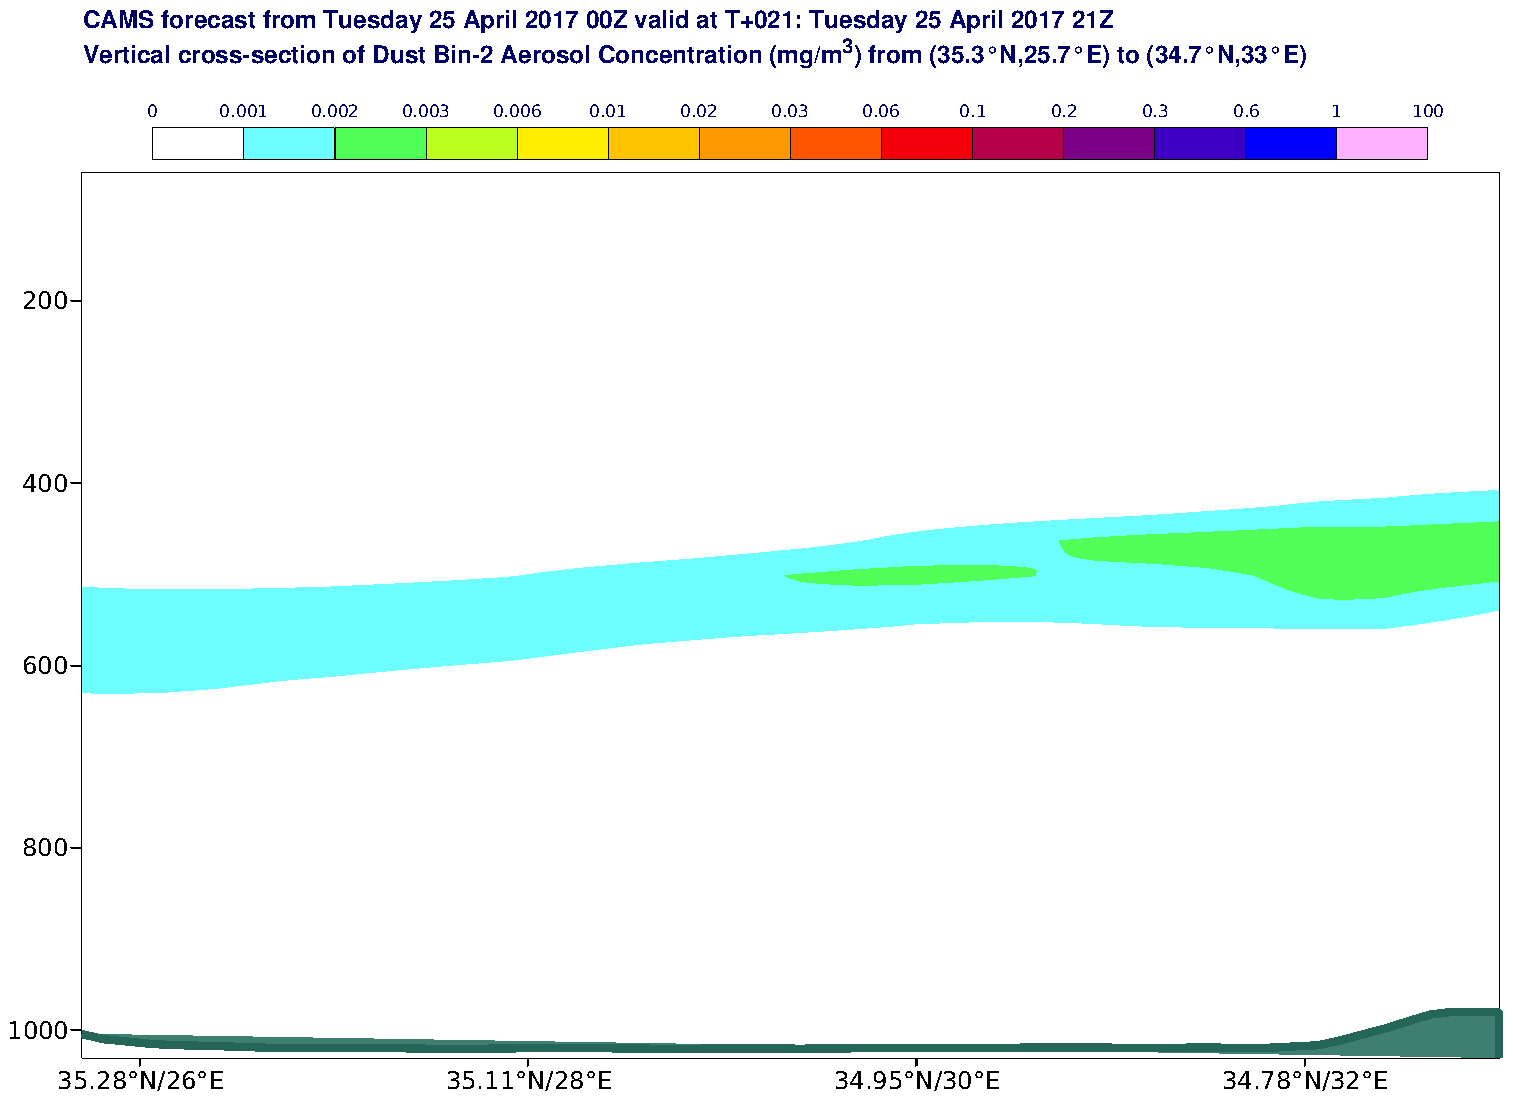 Vertical cross-section of Dust Bin-2 Aerosol Concentration (mg/m3) valid at T21 - 2017-04-25 21:00